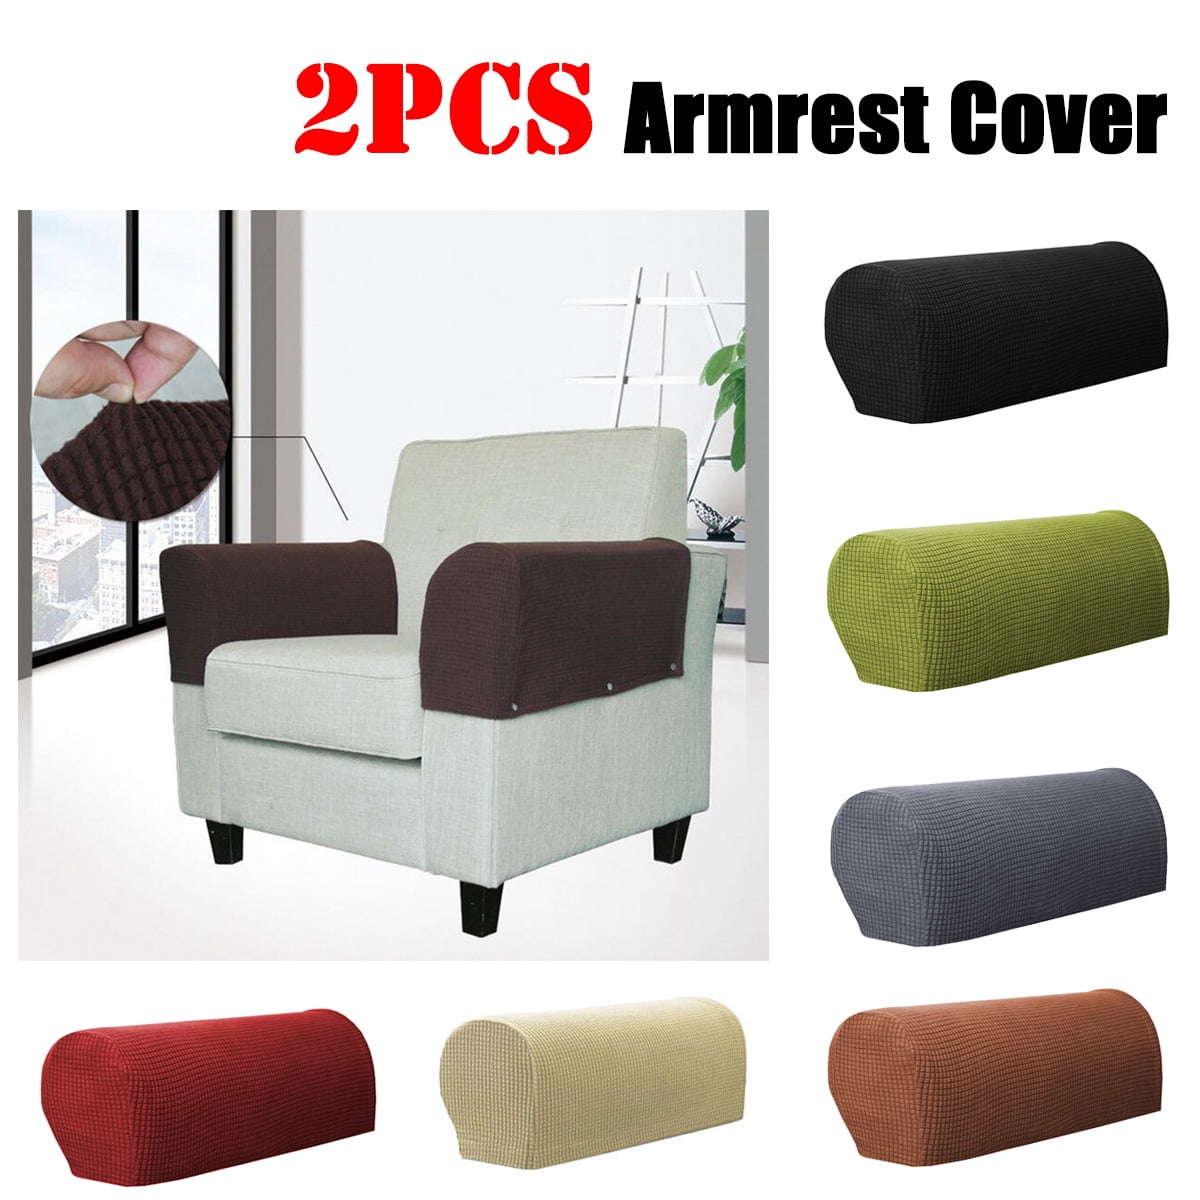 2Pcs Armrest Covers Stretch Set Chair Sofa Arm Protectors Couch Cover Soft 